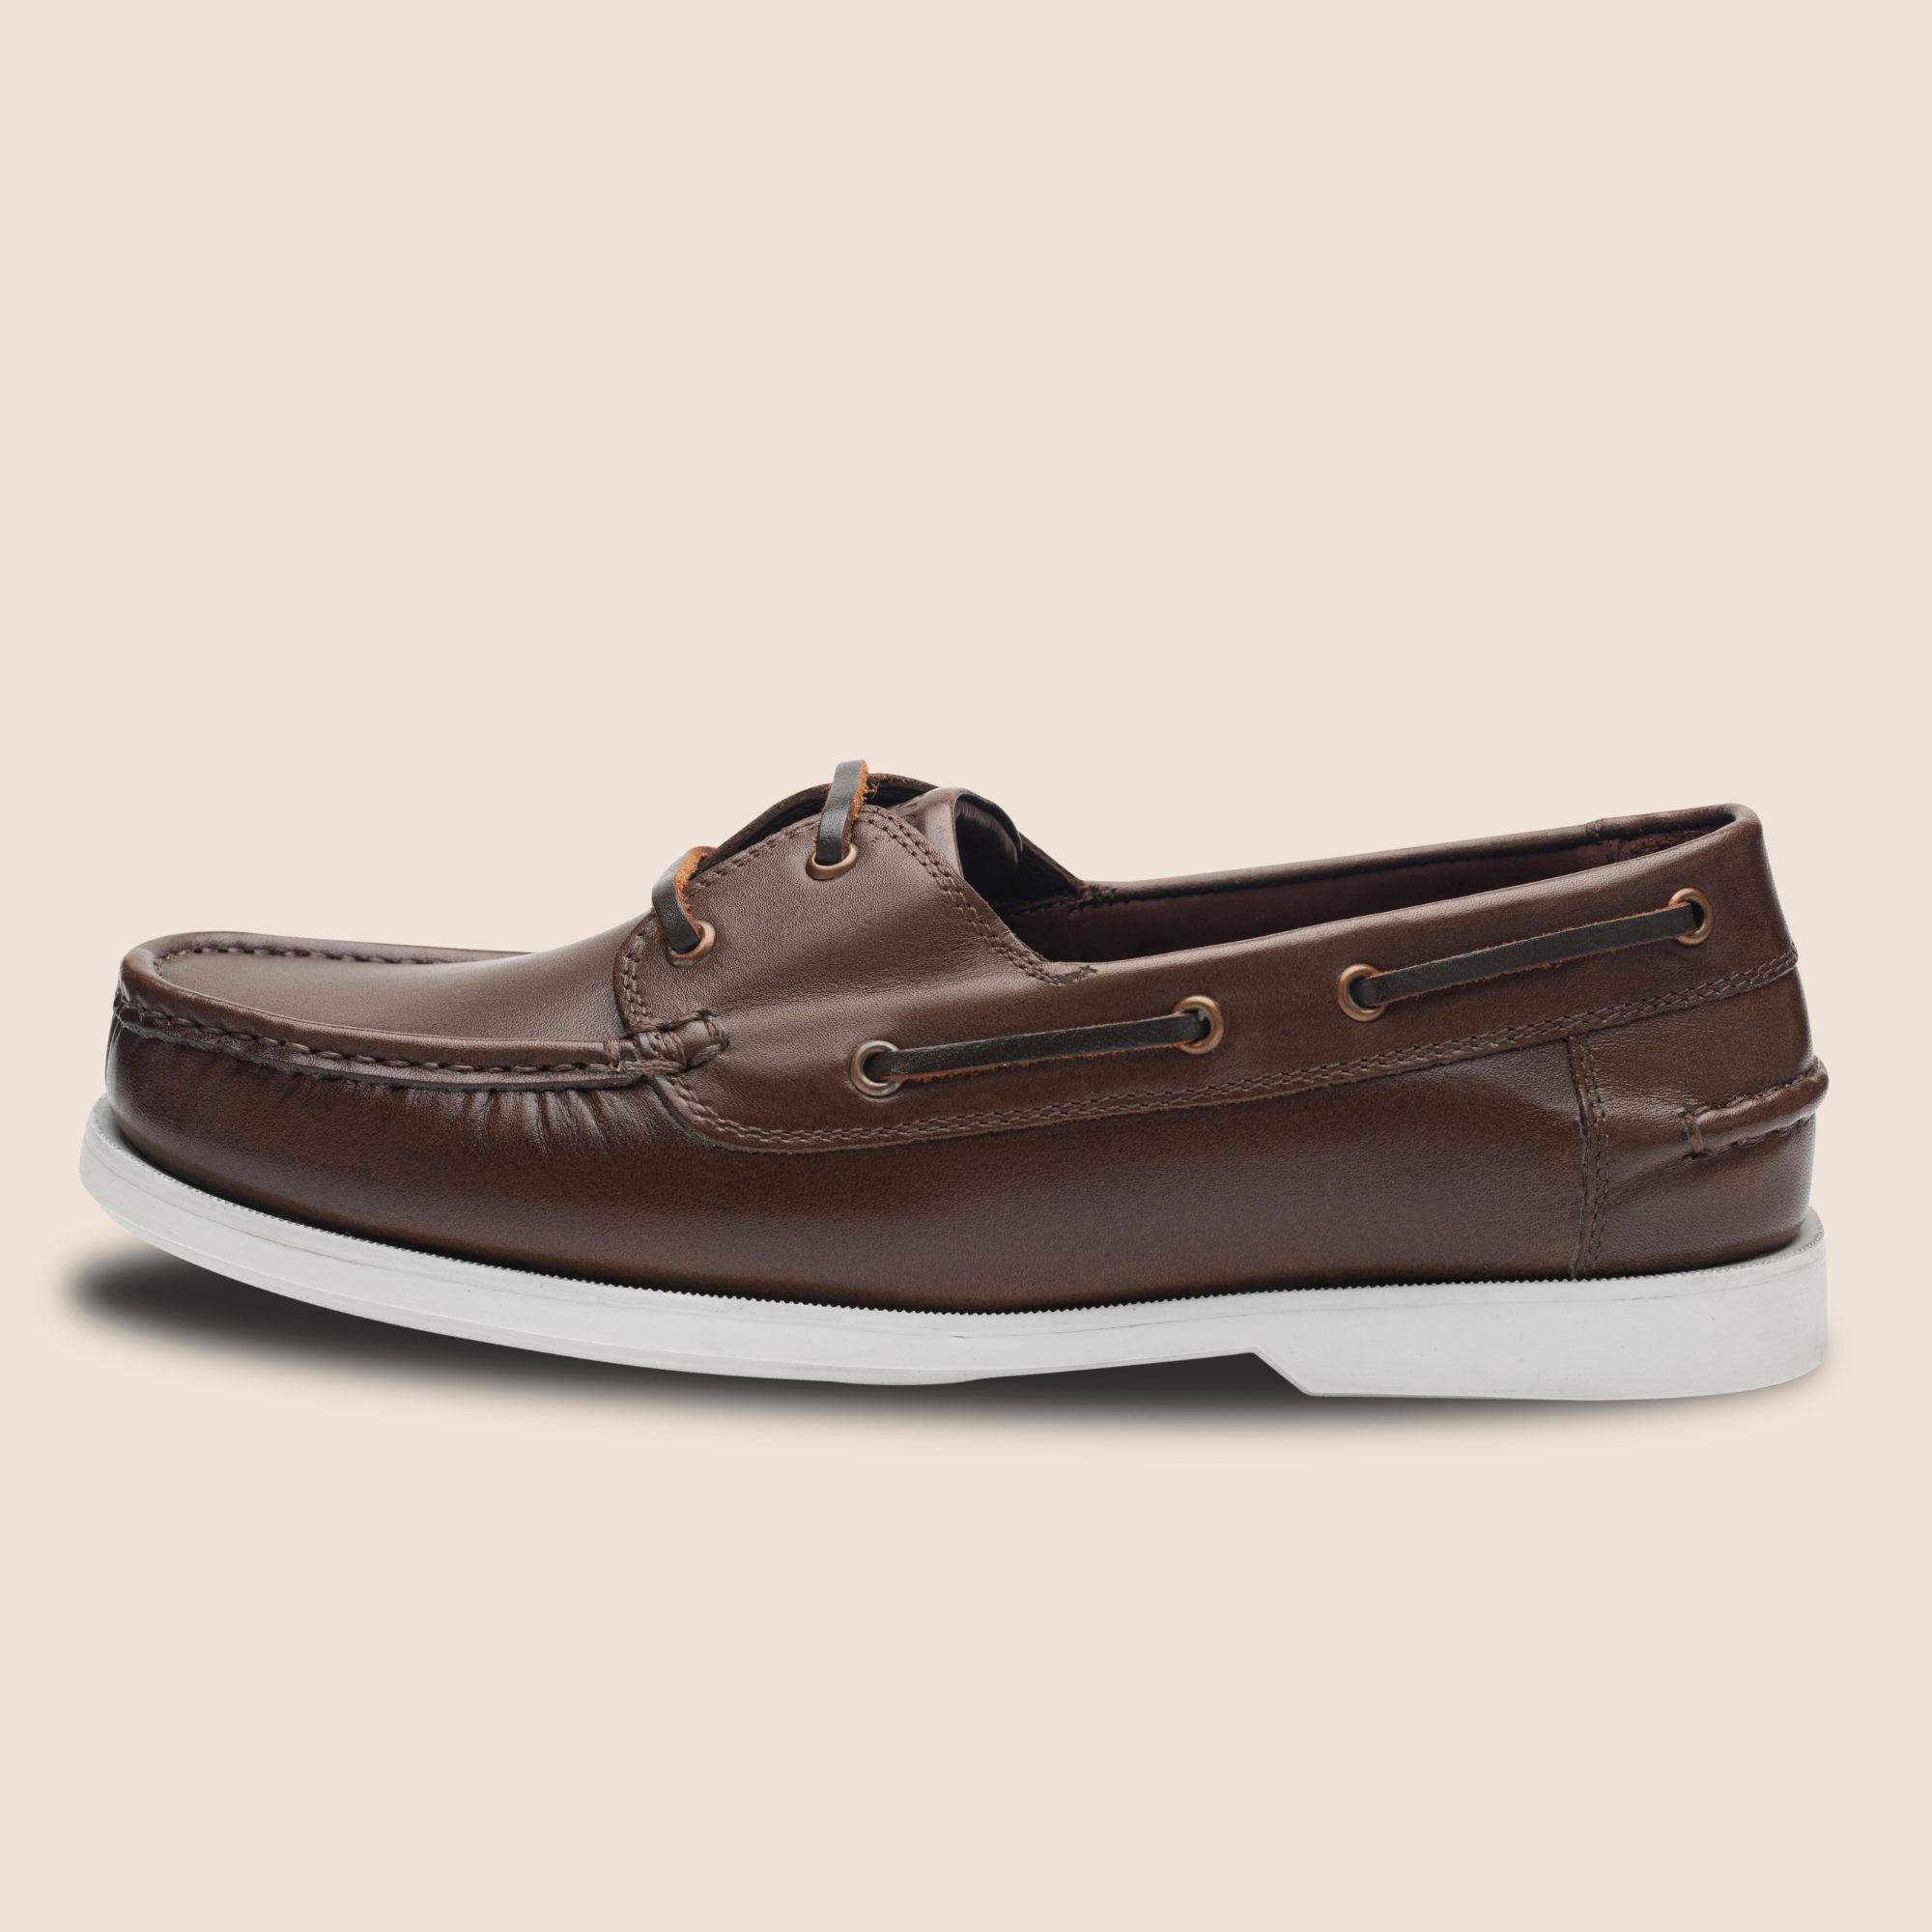 Blake Stitched brown Leather boat shoes for men